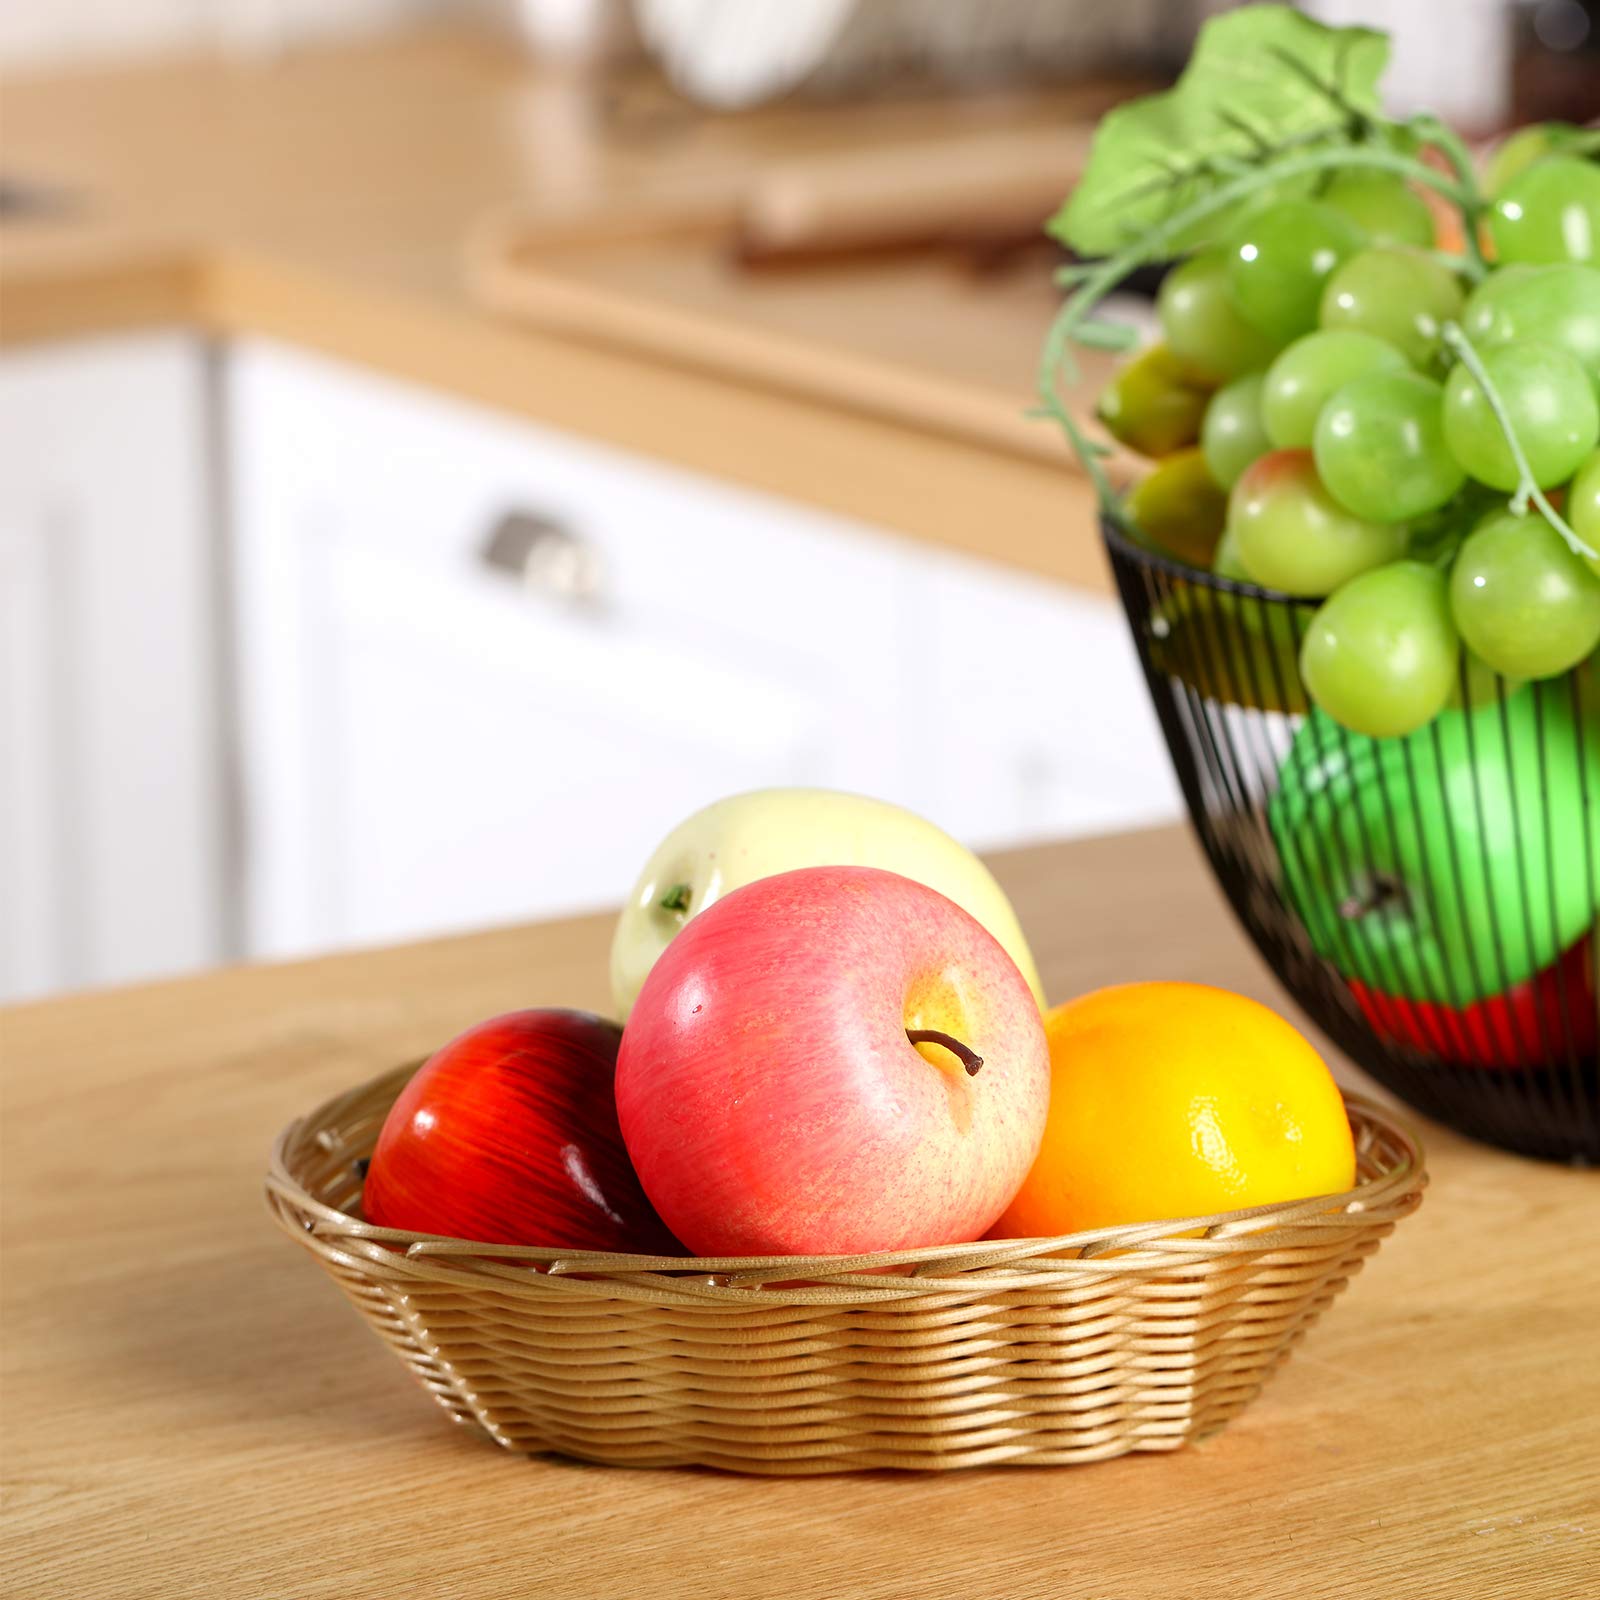 Oval Basket Food Storage Basket Woven Empty Basket Fruit Basket 9 x 6 x 2.25 Inches Present Baskets with Colorful Pull Bows and Clear Bags for Kitchen, Restaurant, Wrapping Presents (6 Pack)